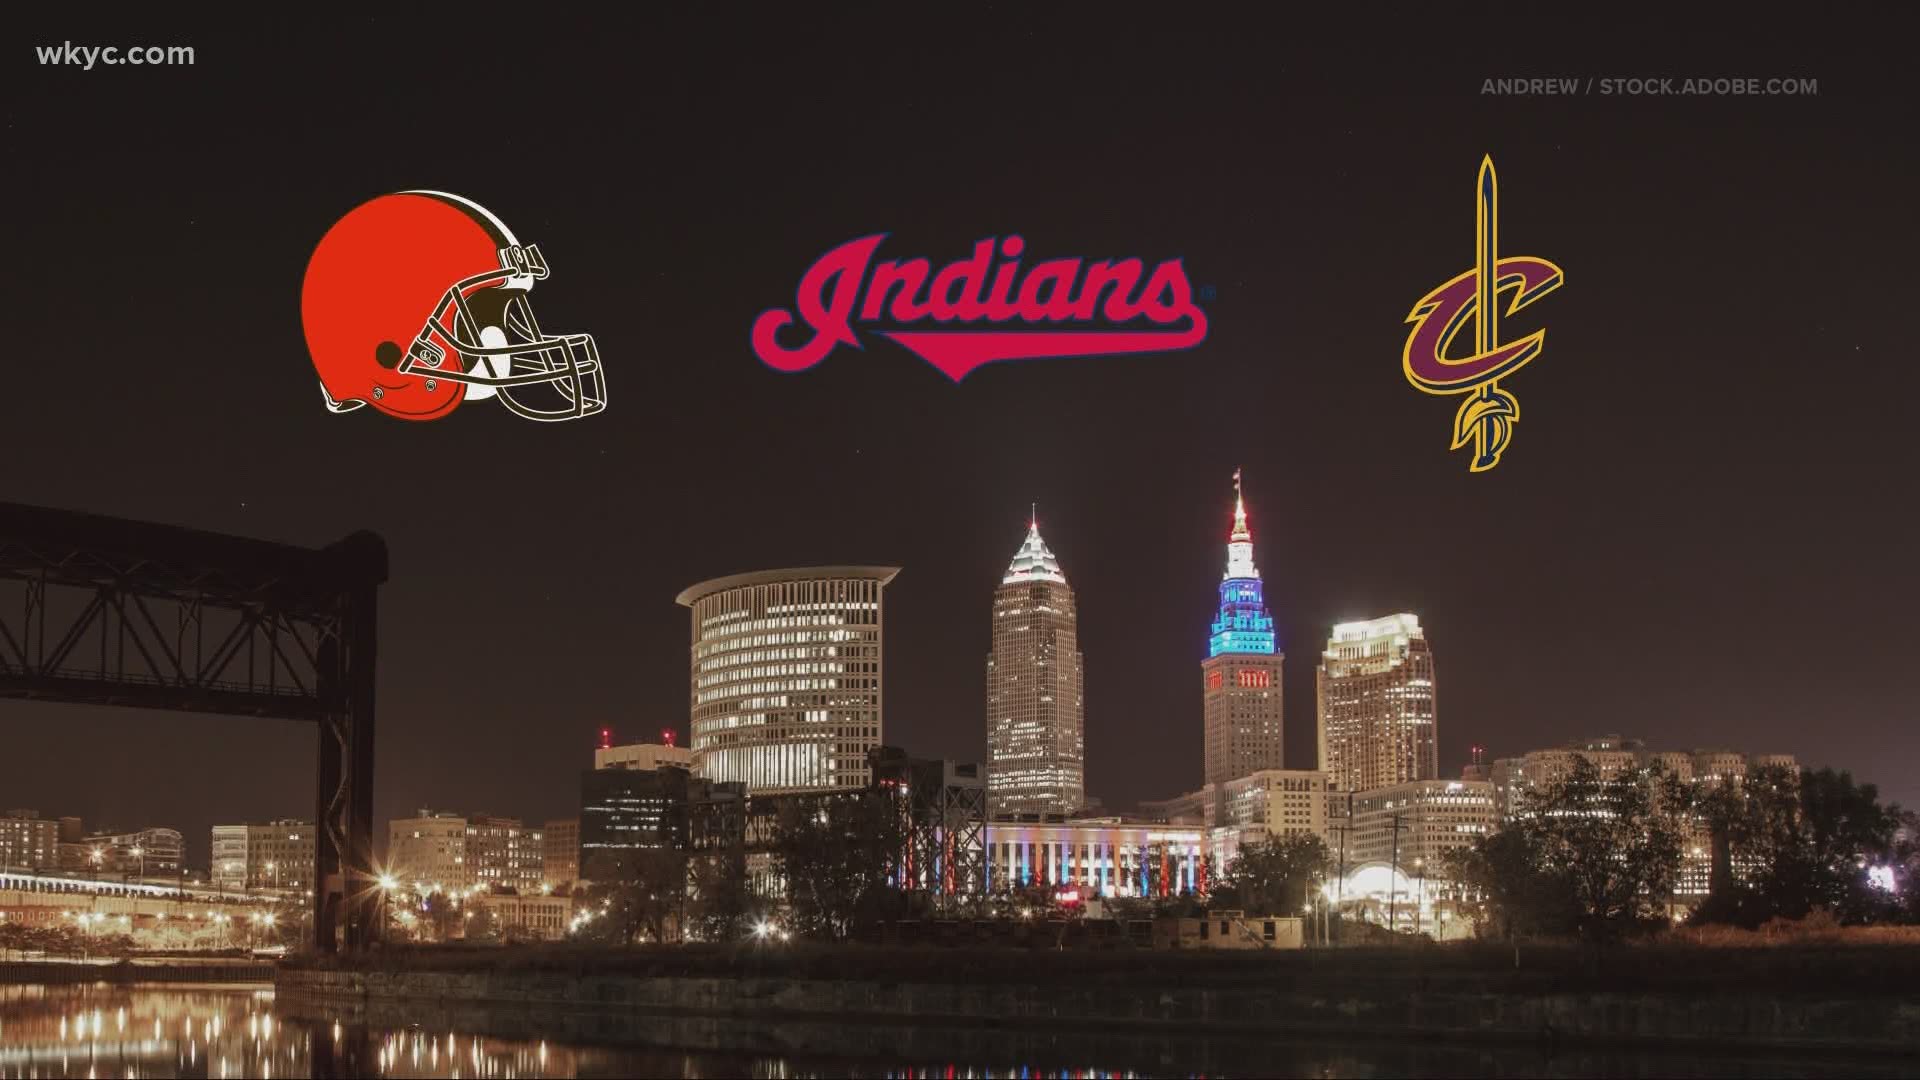 The Browns, Indians, & Cavs announced they are teaming up to stop social injustice.  They are using their platforms to improve relationships with police & public.